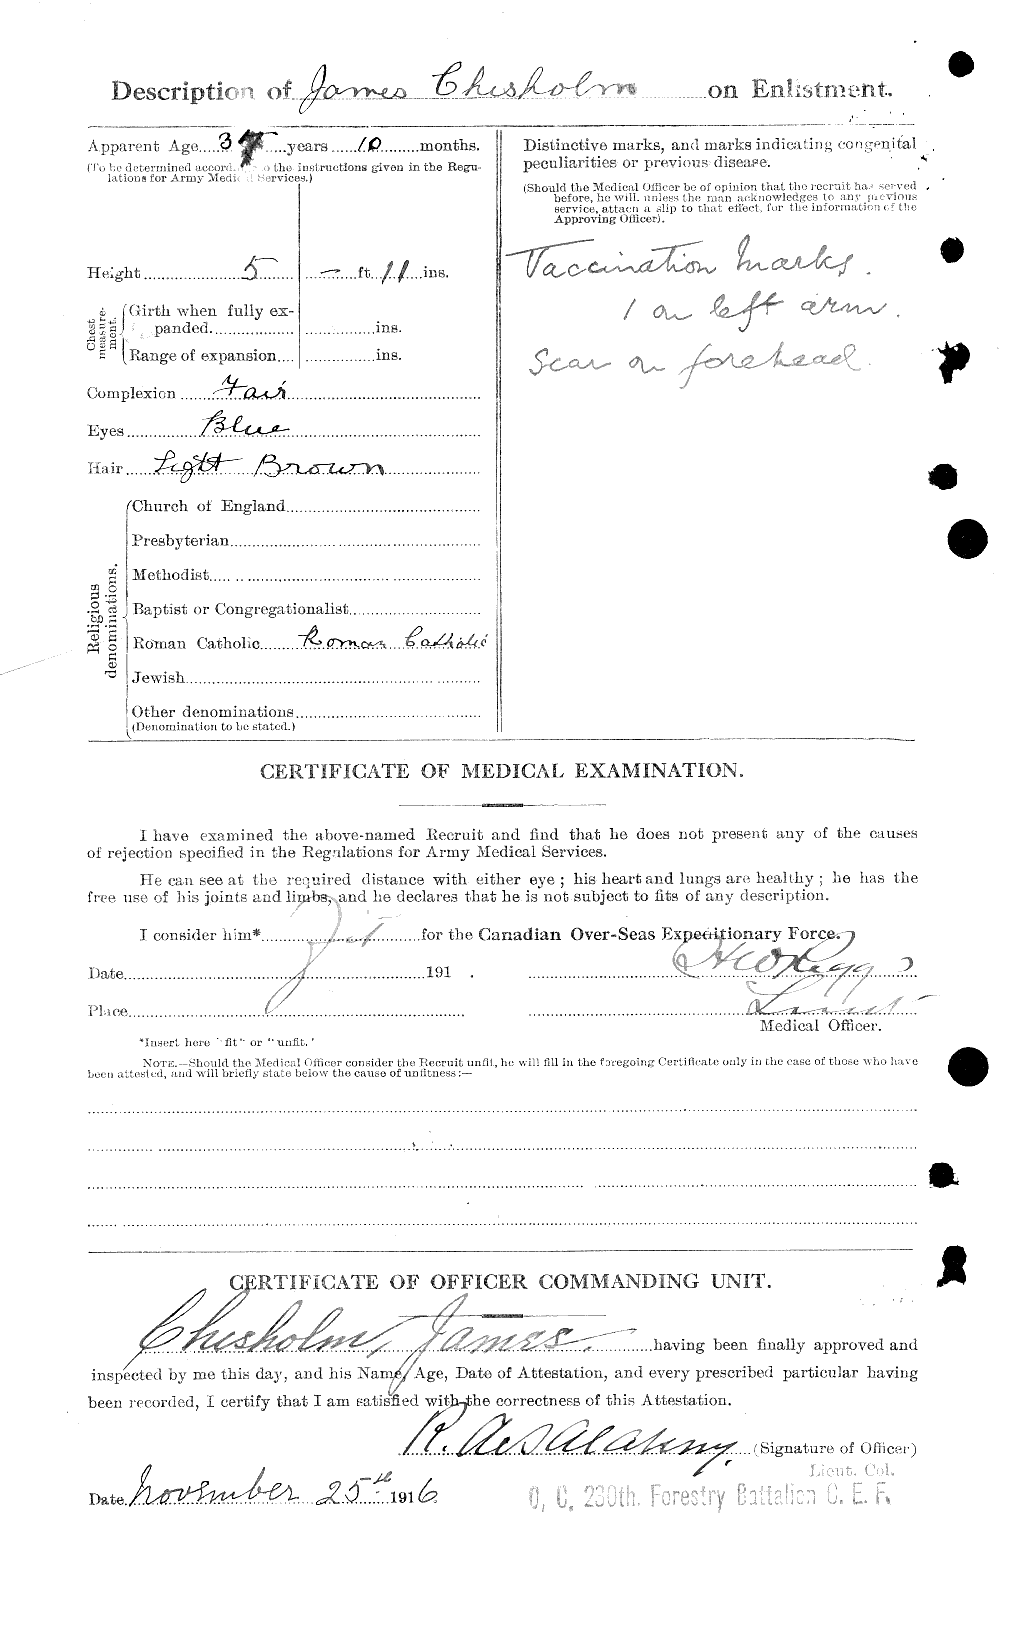 Personnel Records of the First World War - CEF 016262b